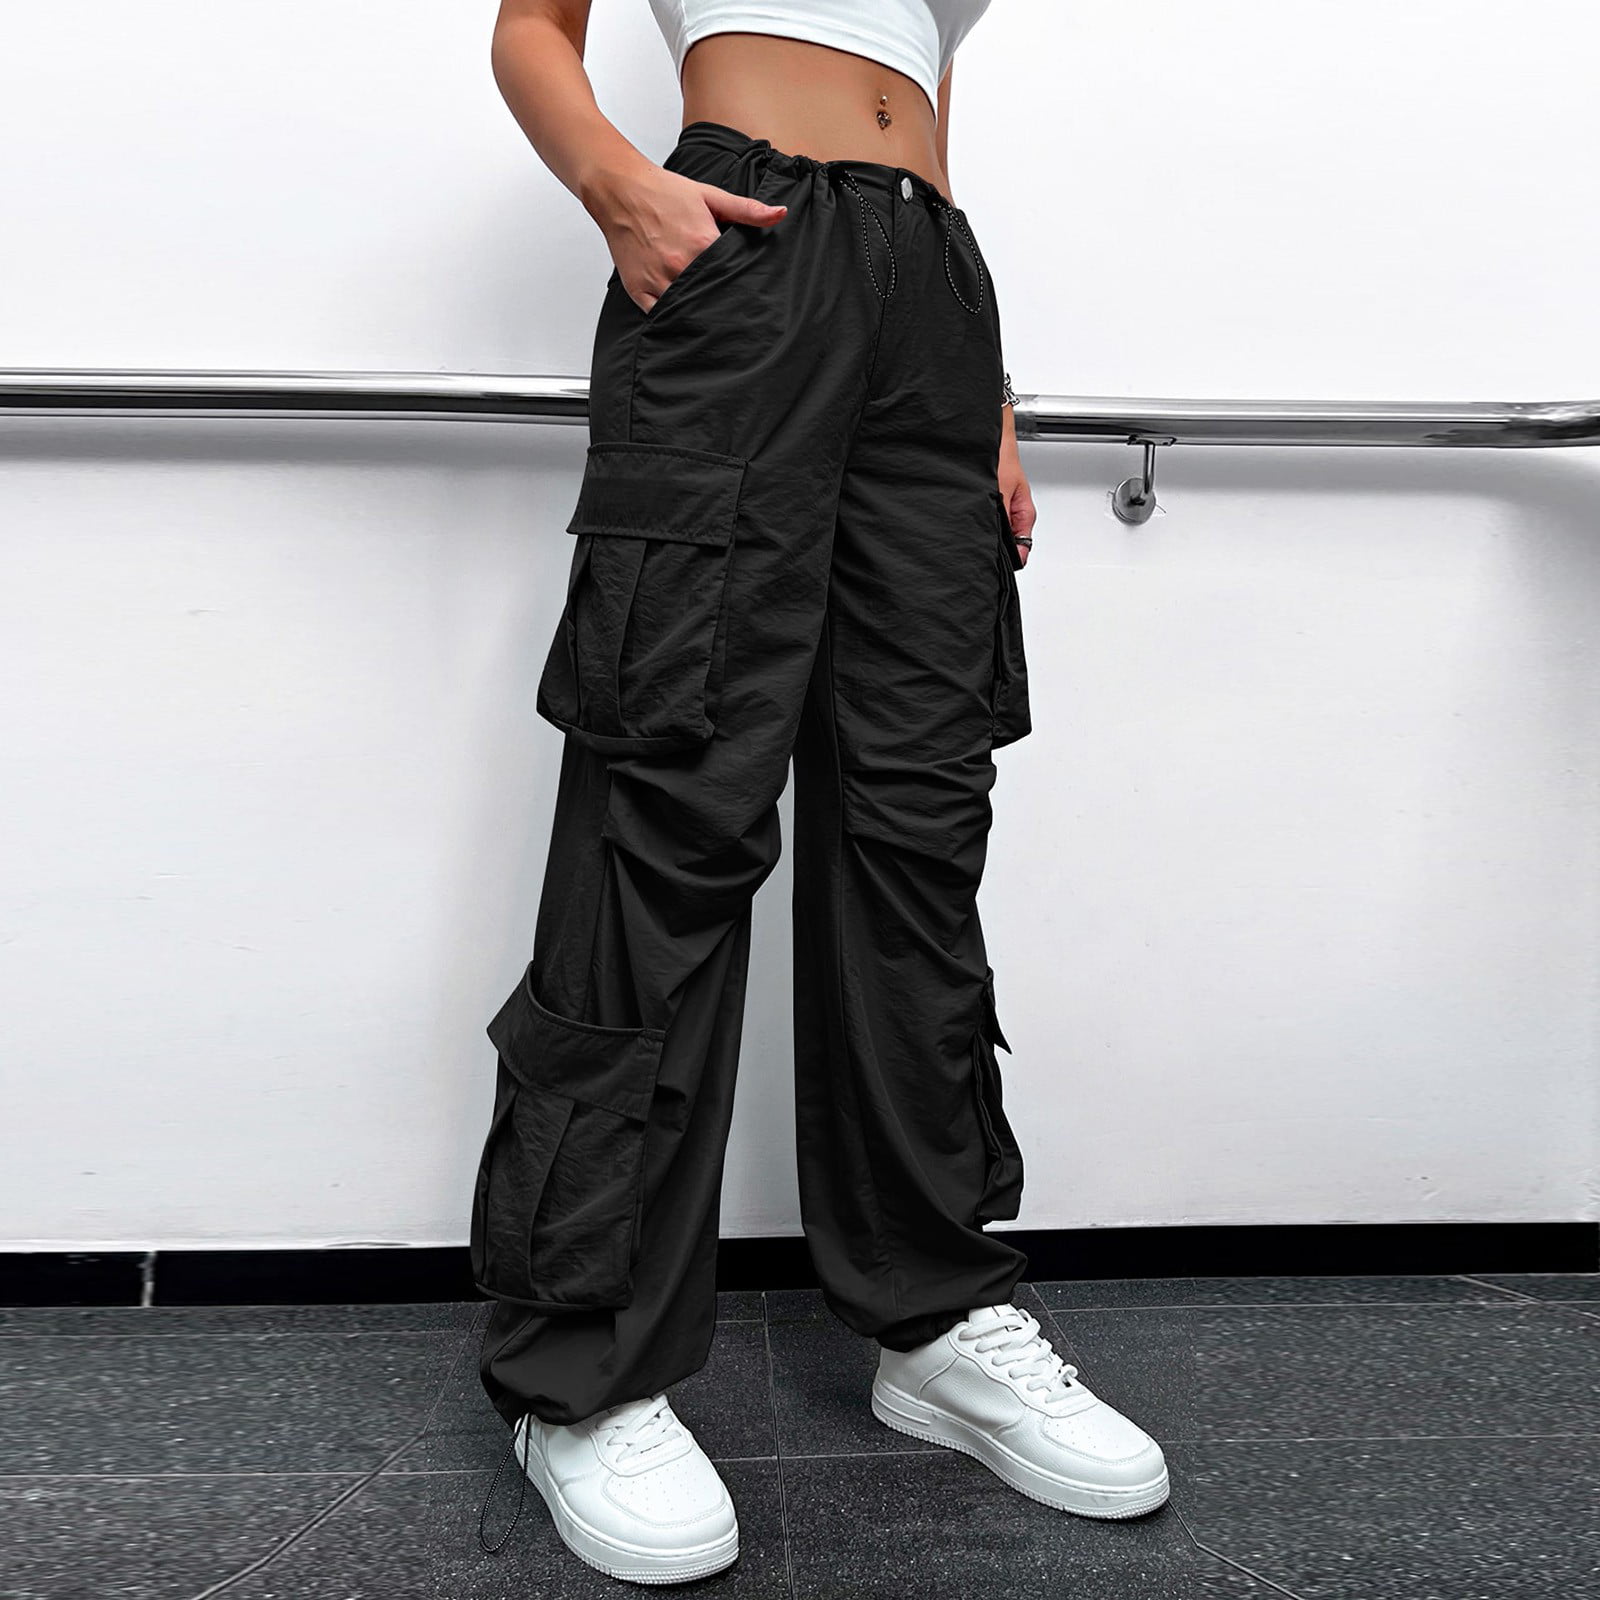 2023 Womens Light Khaki Brown Cargo Pants Women With Big Pocket, Patchwork  Design, Drawstring Closure, And Low Waist Perfect For Streetwear, Baggy Or  Casual Wear From Cordes, $24.54